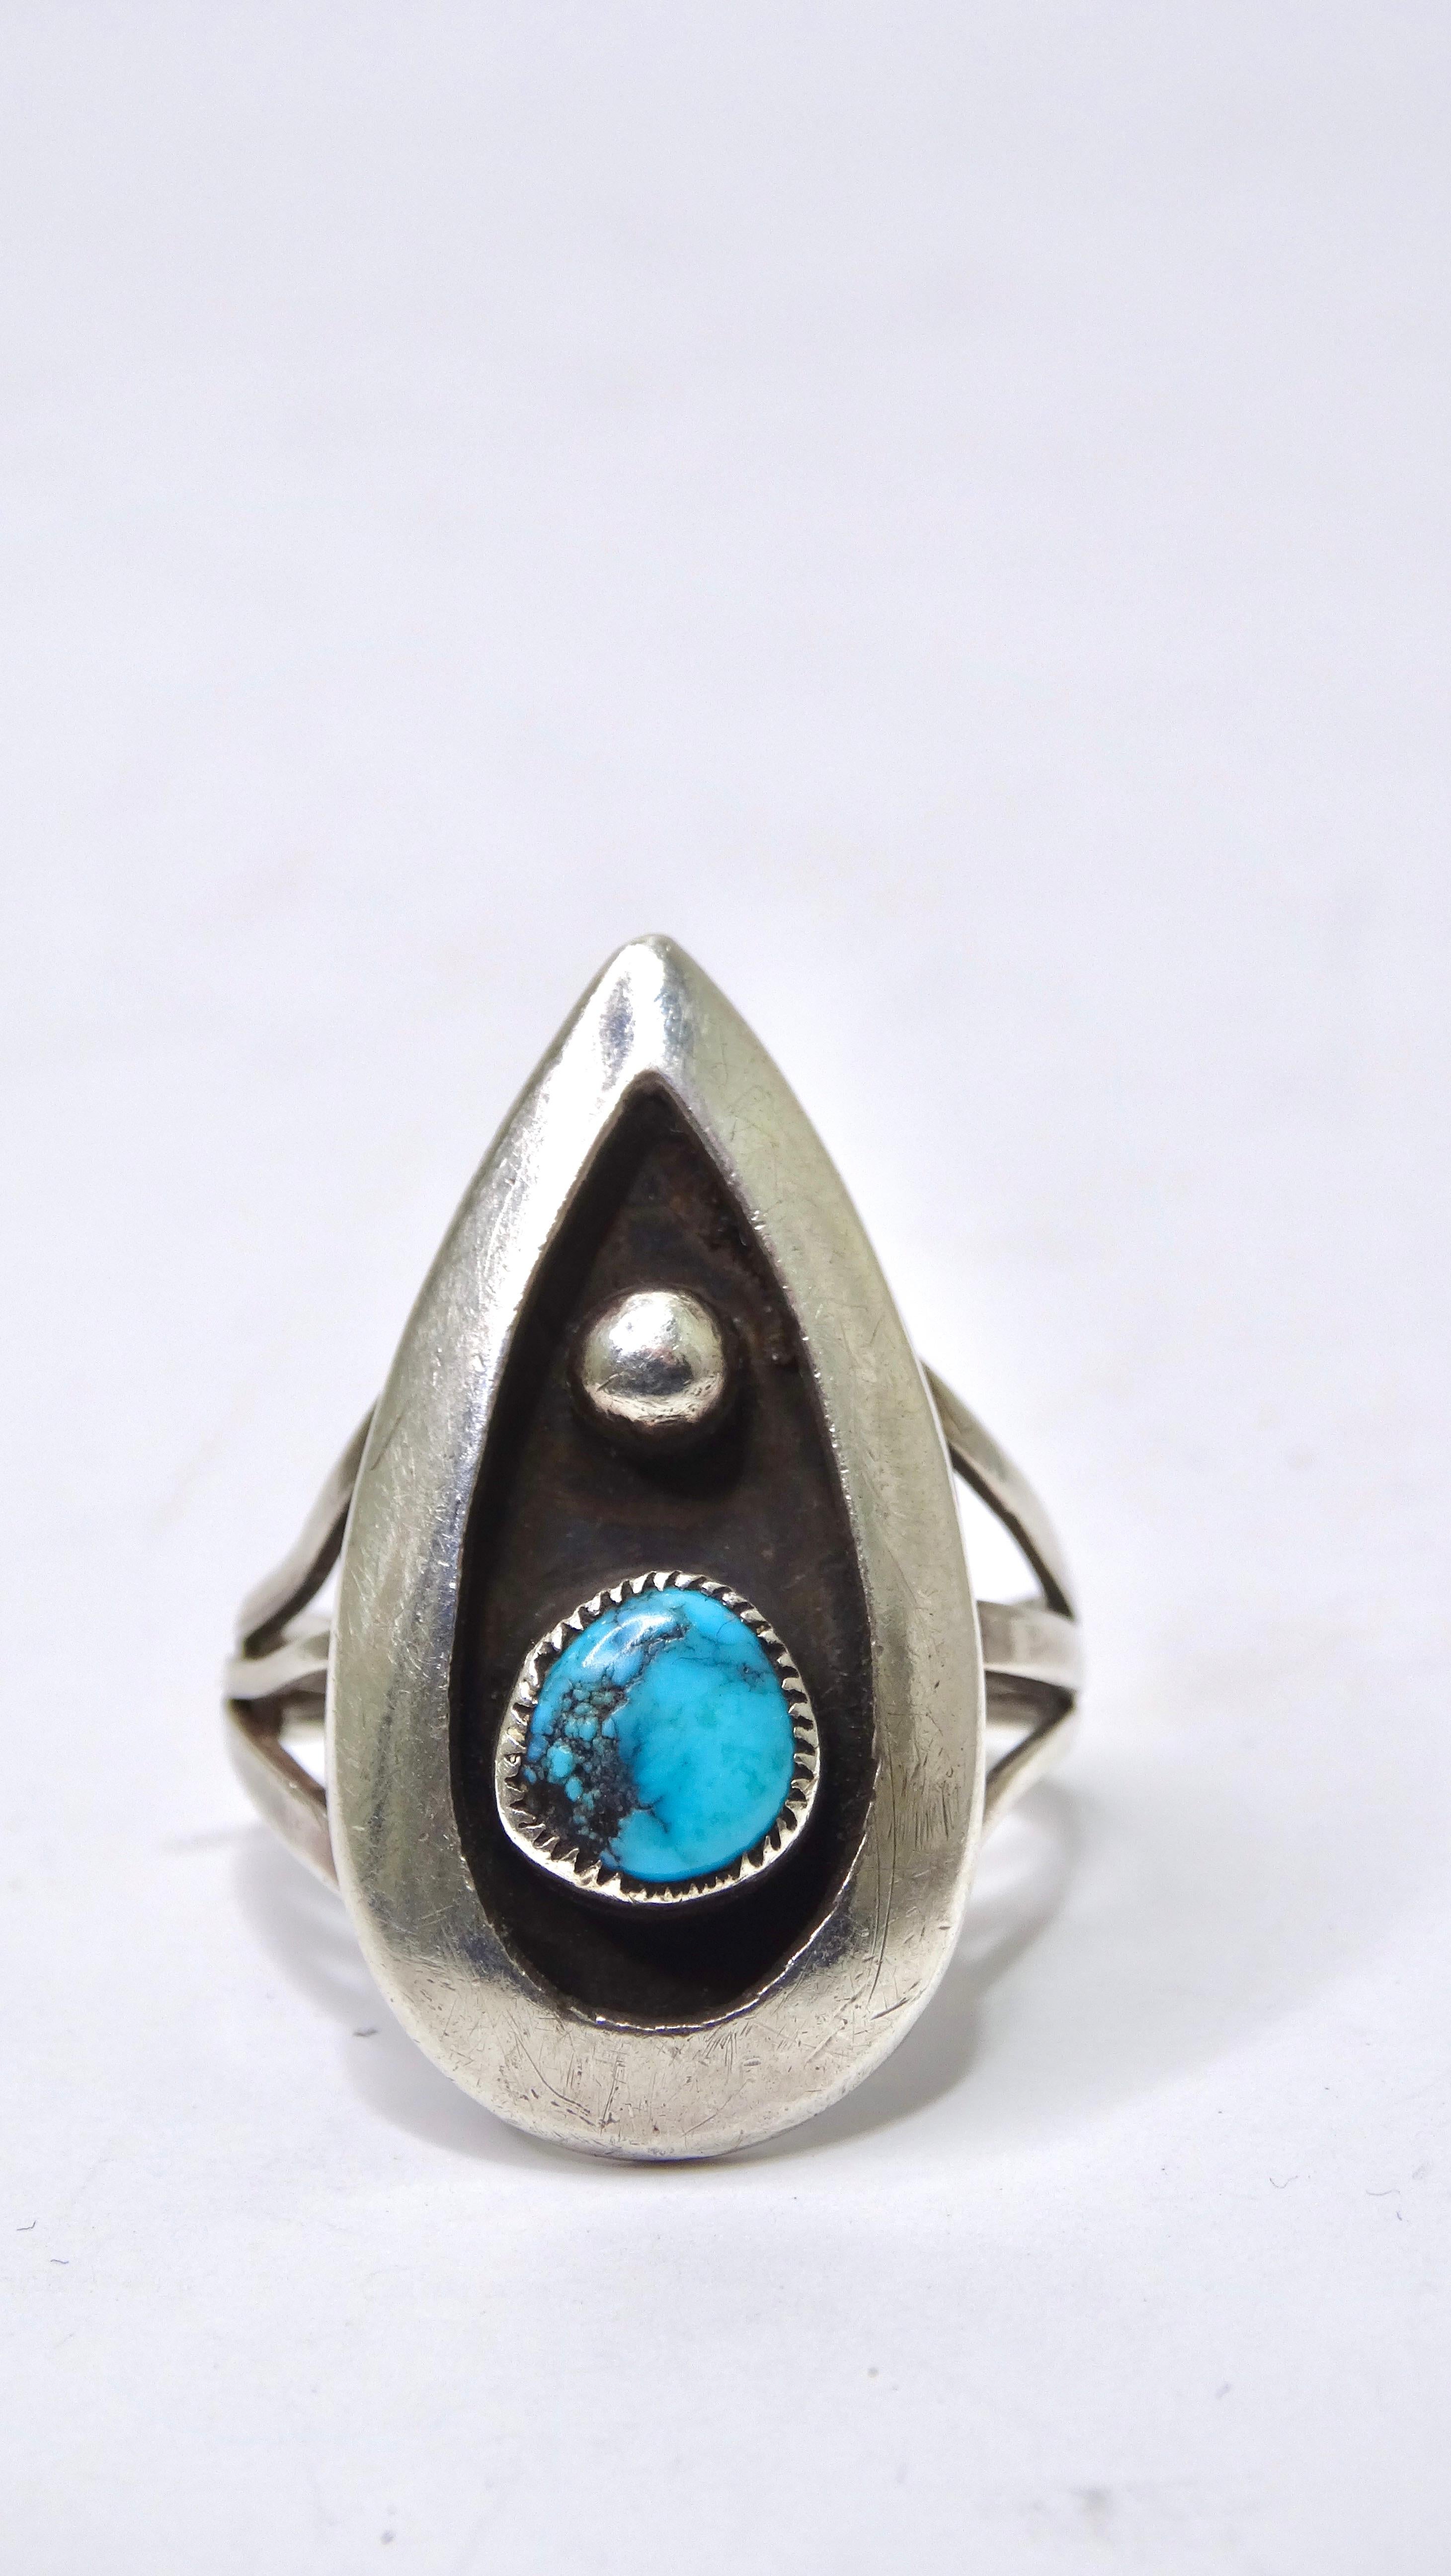 This impeccably designed ring can be yours today! Don't miss your chance to get your hands on this beautiful turquoise stone in a rough round cut. Turquoise is known for representing wisdom, tranquility, protection, good fortune, and hope. This is a